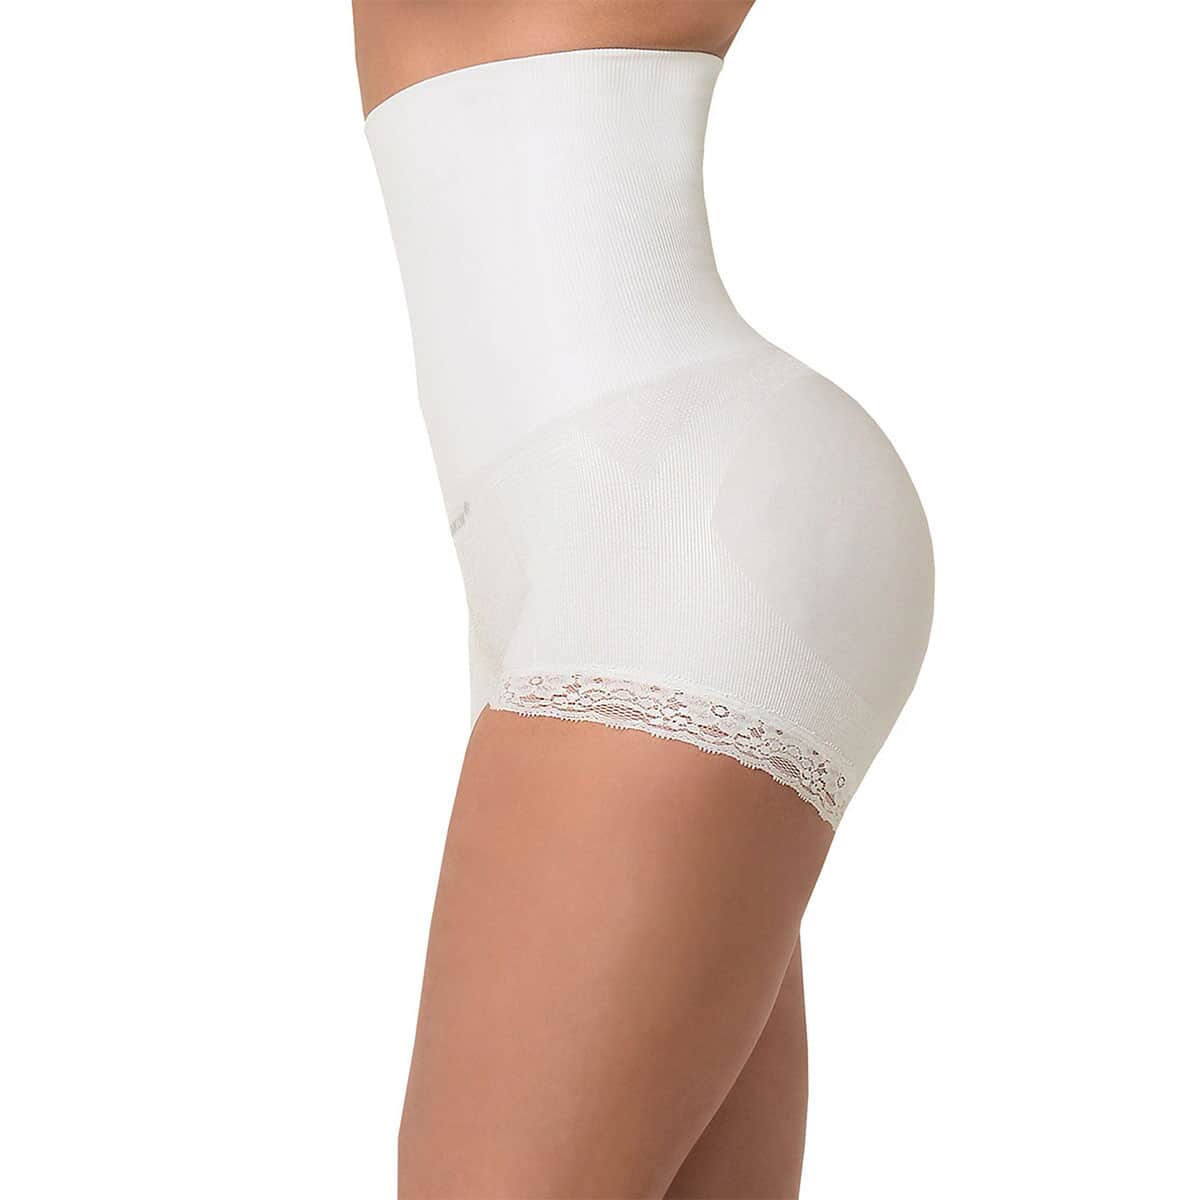 Sankom Patent White Lace Brief Shaper For Women with Pearl Fibers - XS image number 0